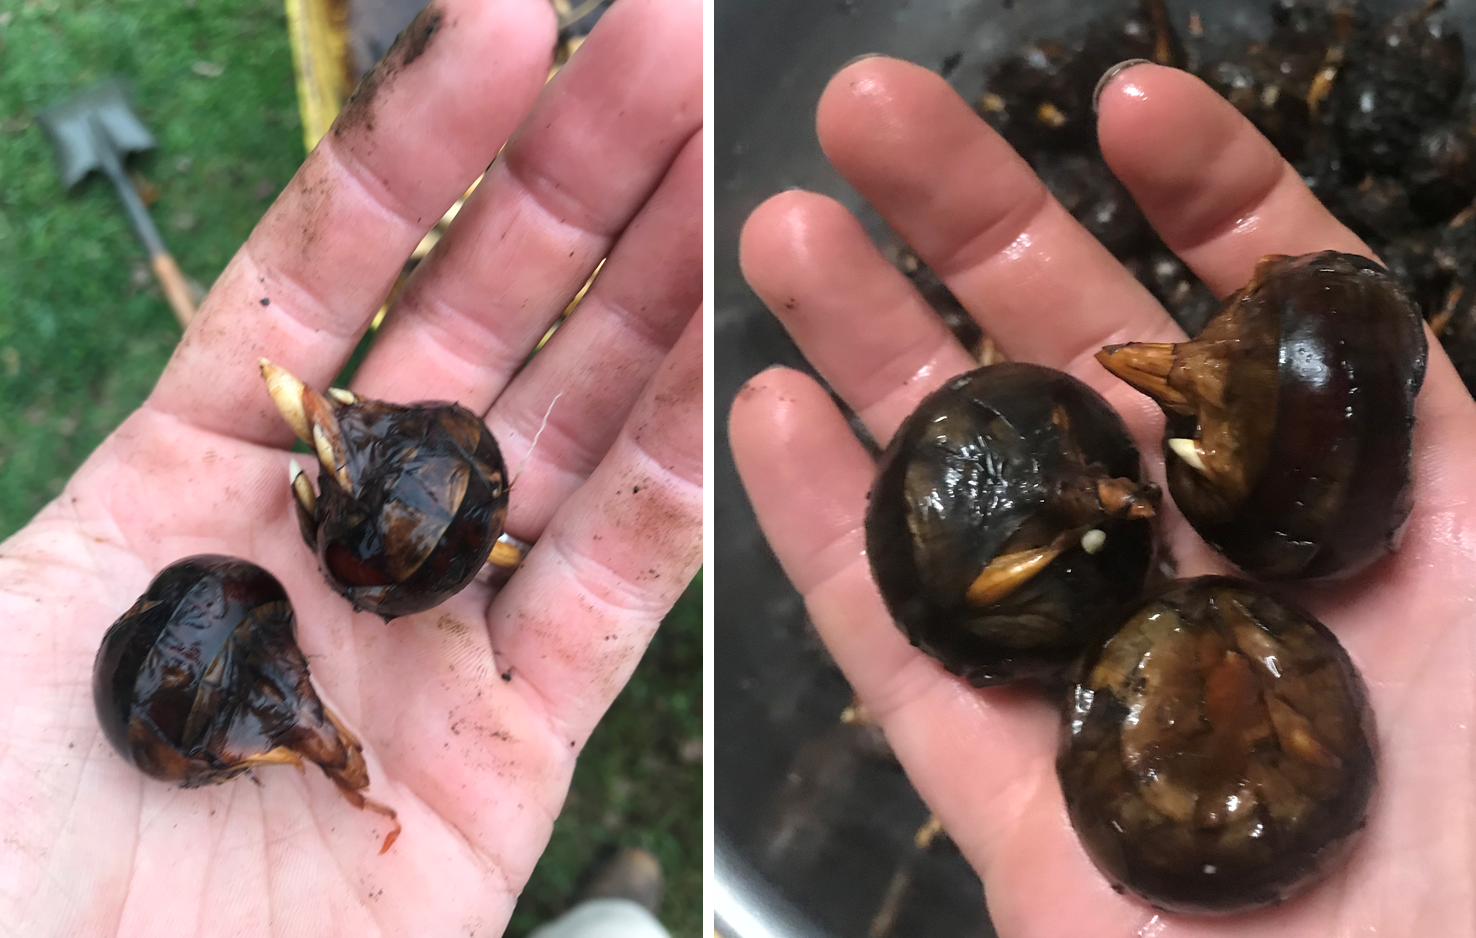 shows a size comparison of water chestnuts from a flooded  bed and an unflooded bed.  those fro the unflooded bed are about half the size